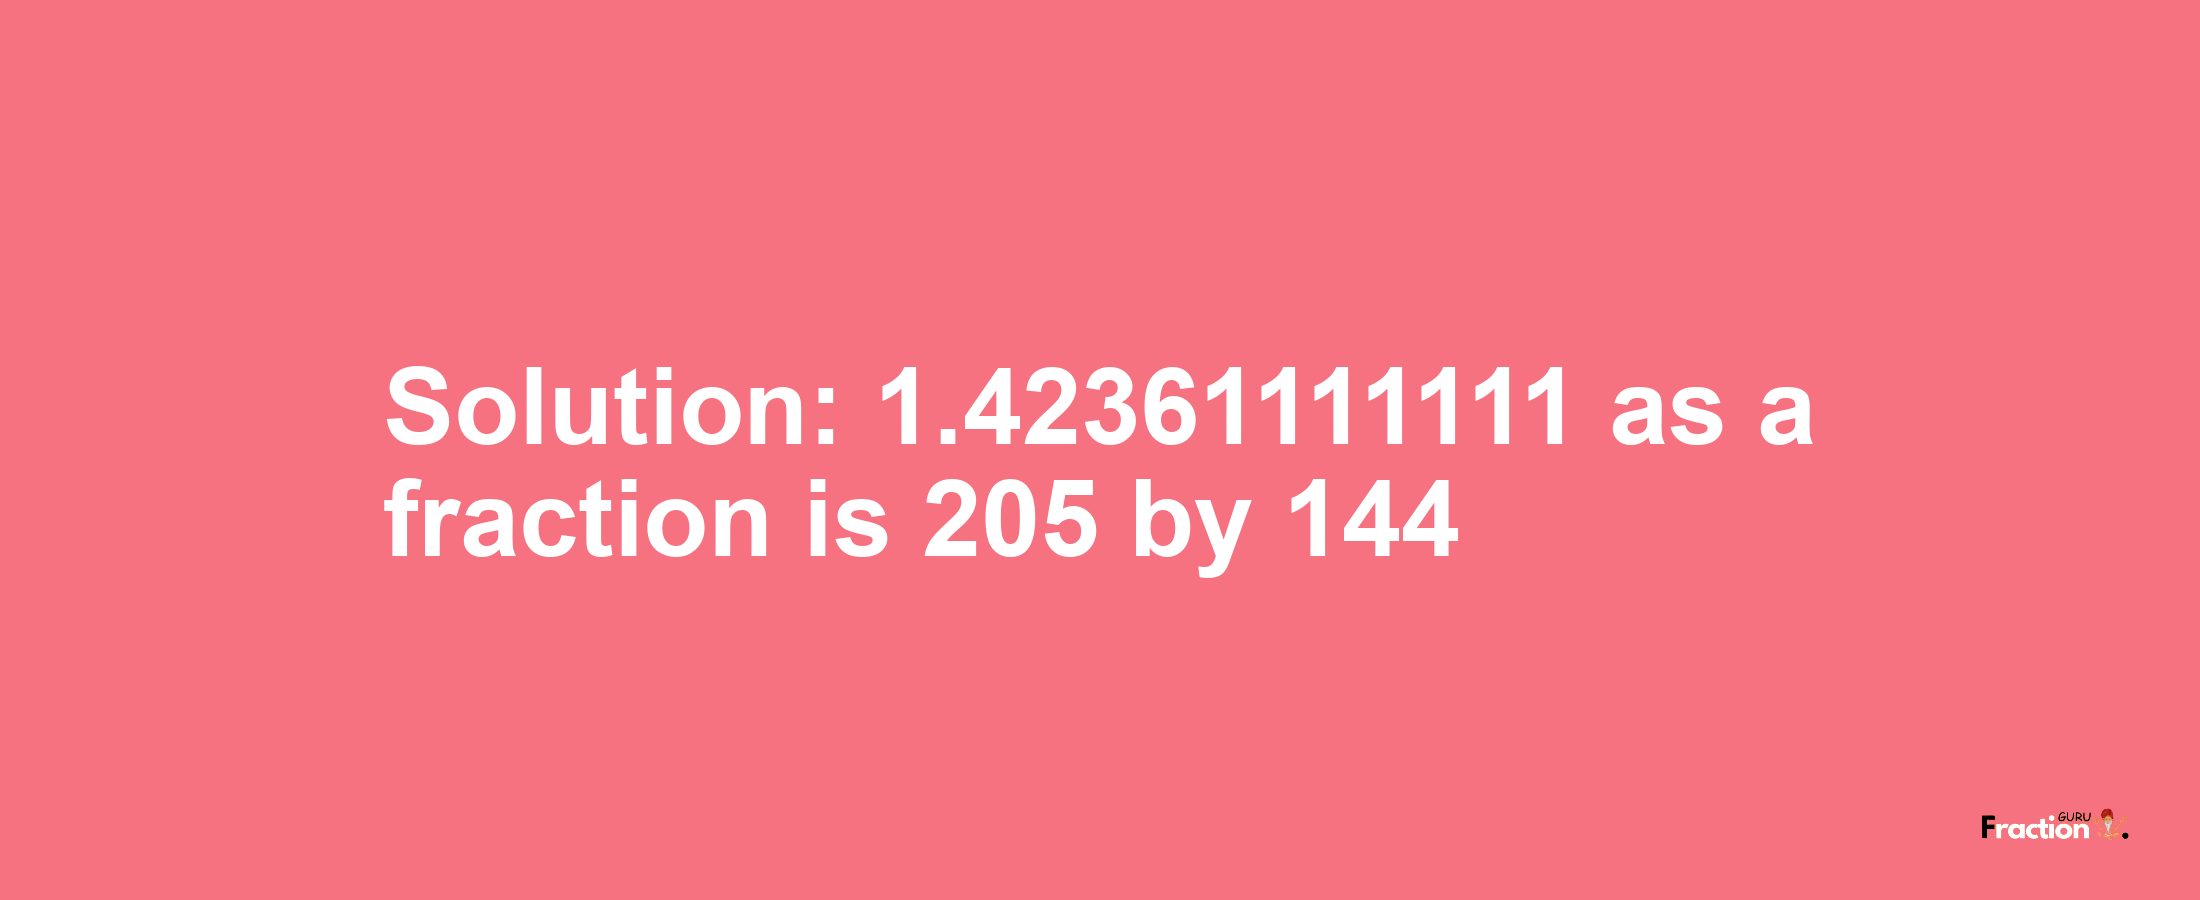 Solution:1.42361111111 as a fraction is 205/144